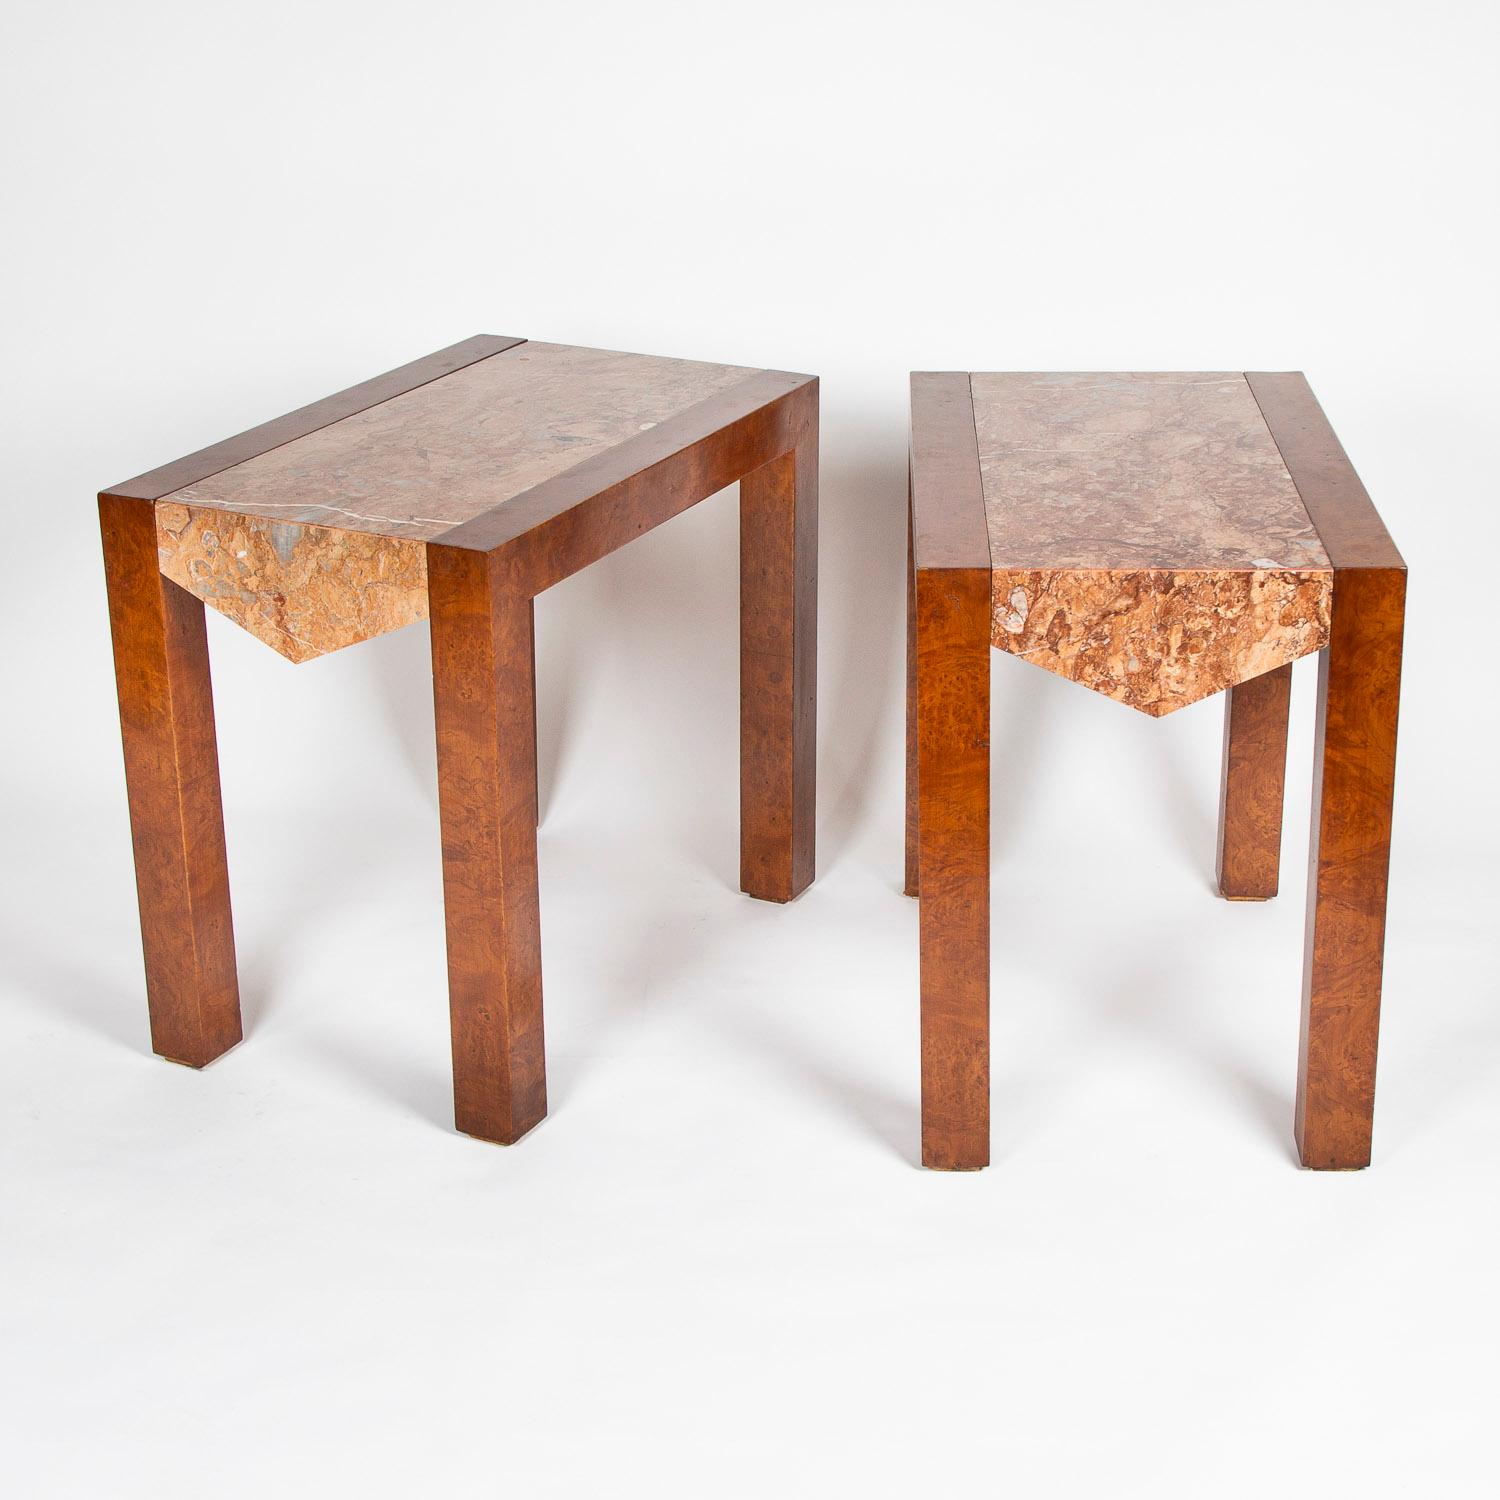 A pair of amboyna side tables with Alicante marble tops.

Designed by Pascua Ortega, Valencia.

Label under the marble top: VALENPAS, S.A. PASCUA ORTEGA VALENCIA 00 1142.



 